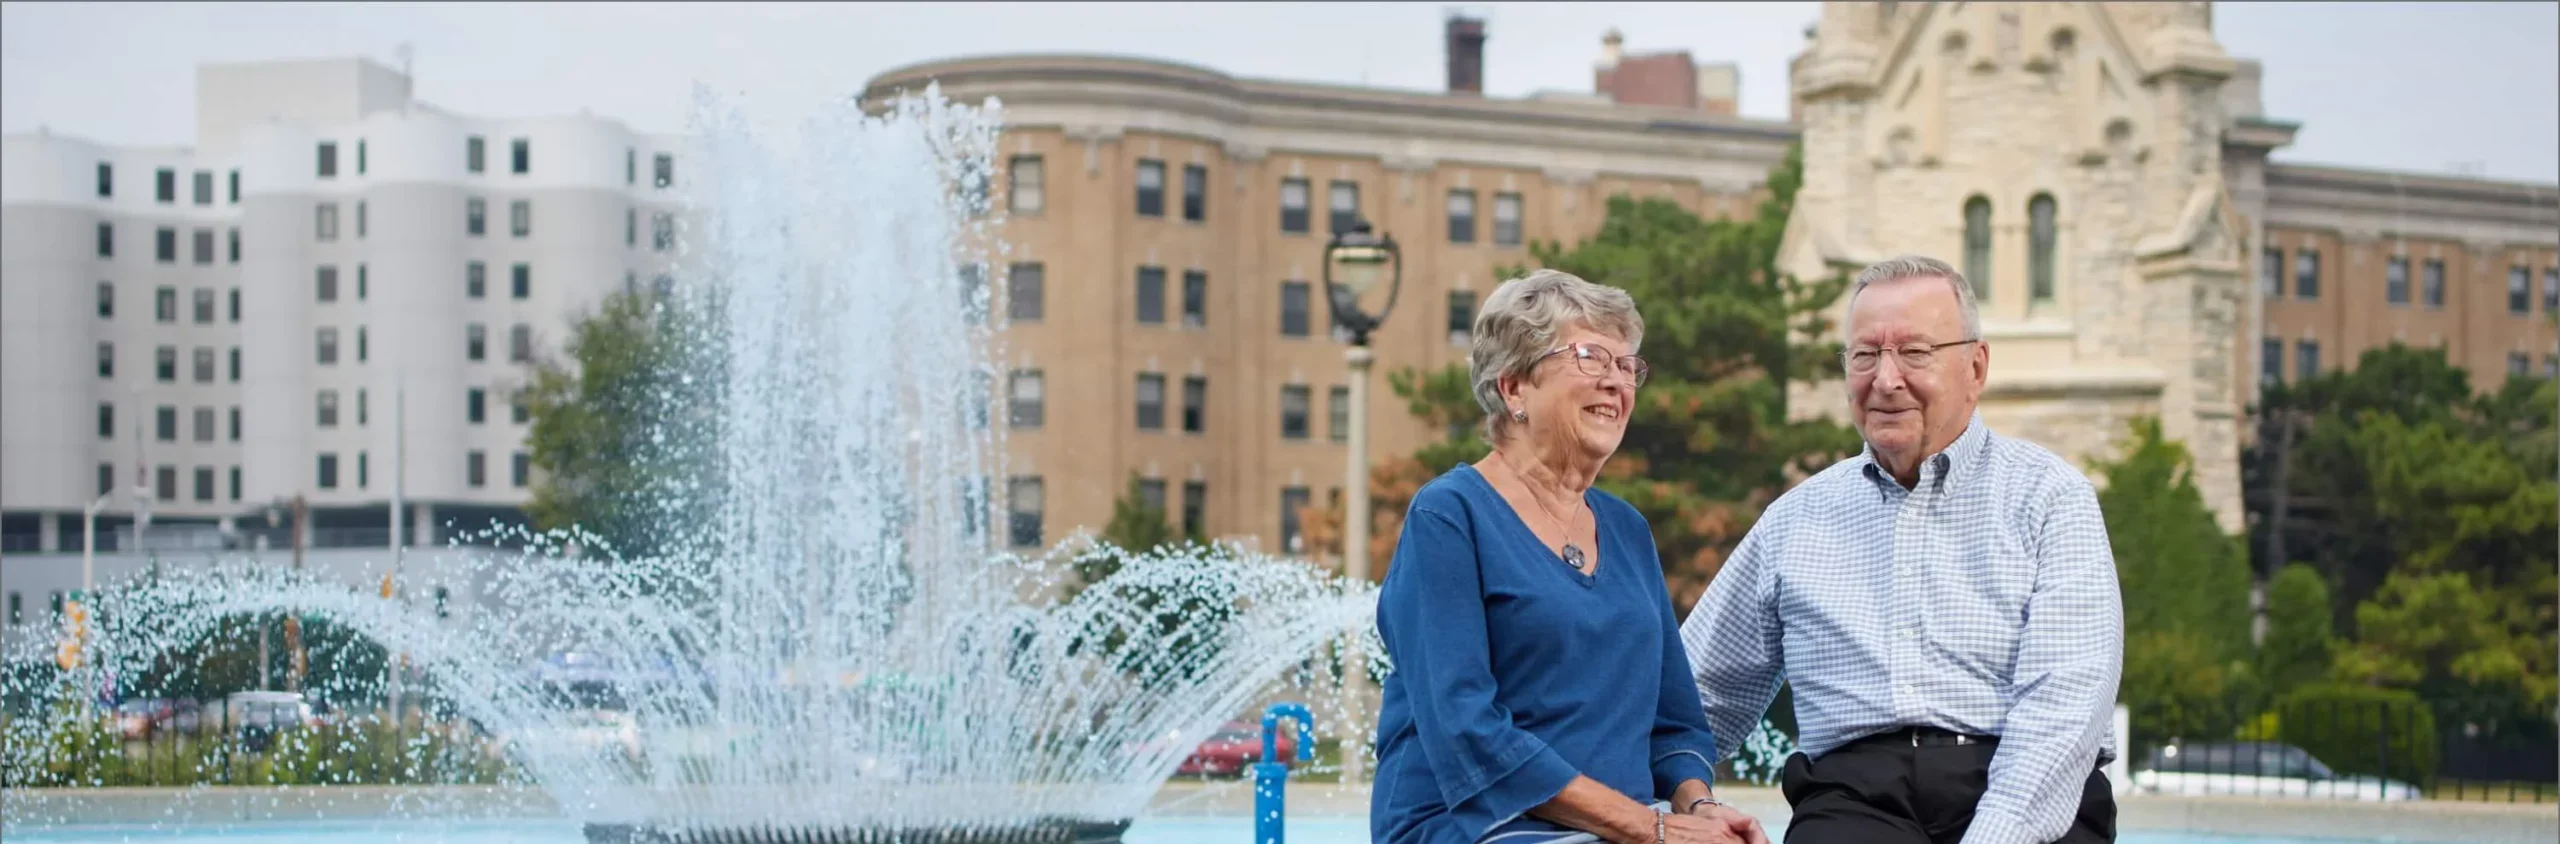 Two seniors enjoying a day by a fountain